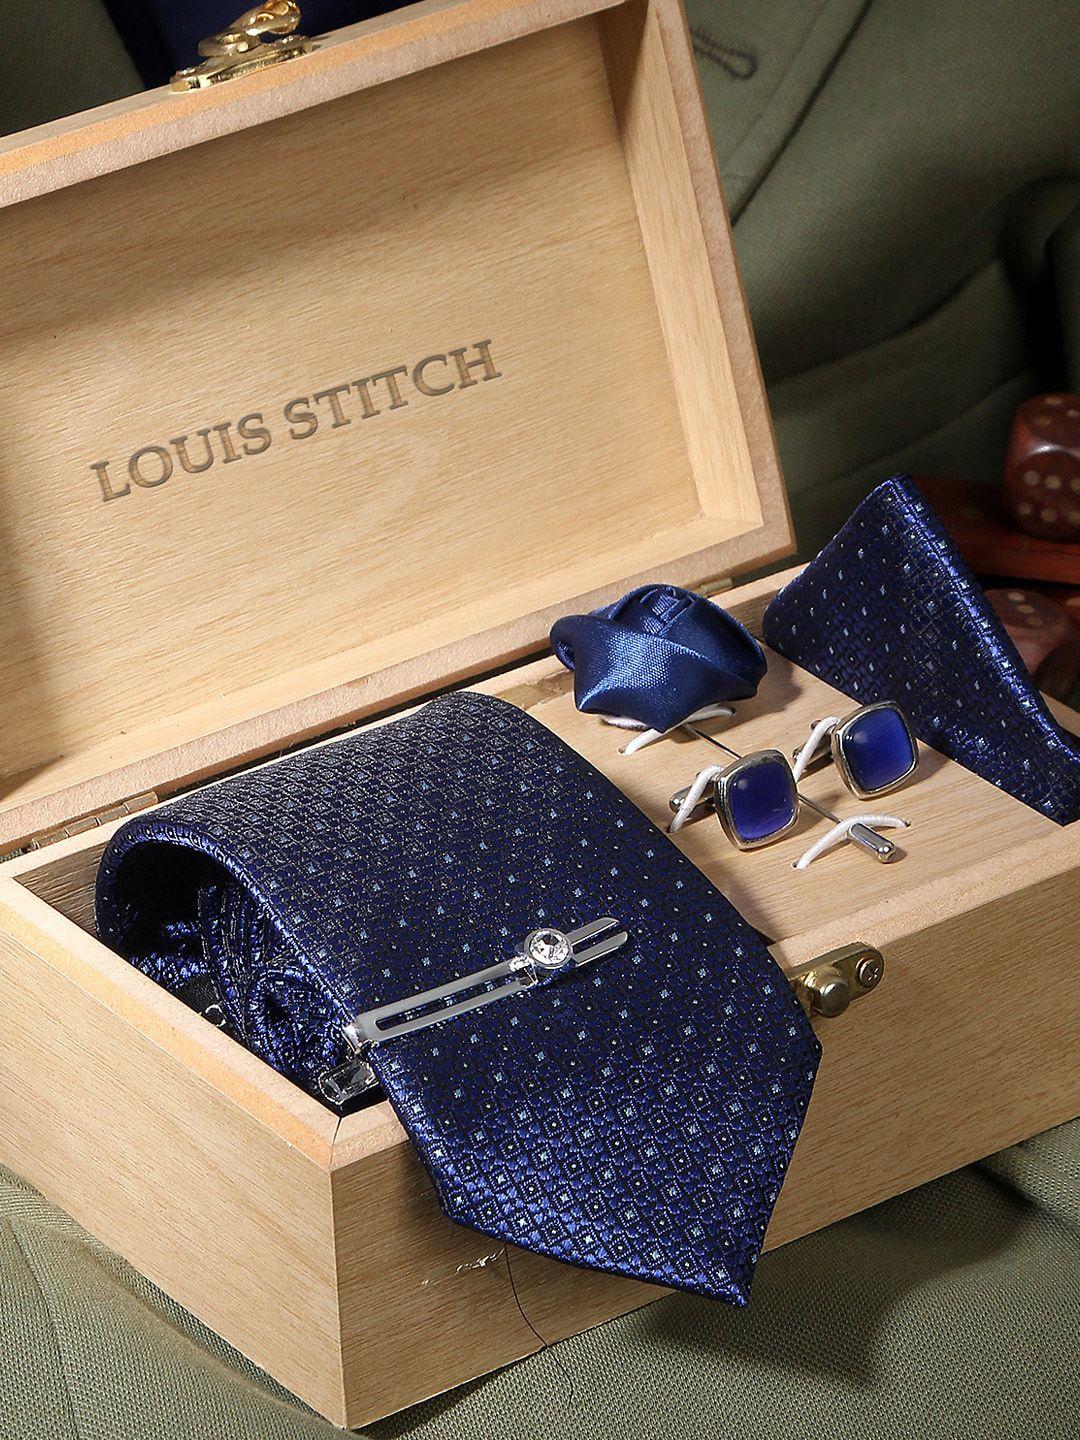 louis stitch men blue & silver-toned printed accessory gift set